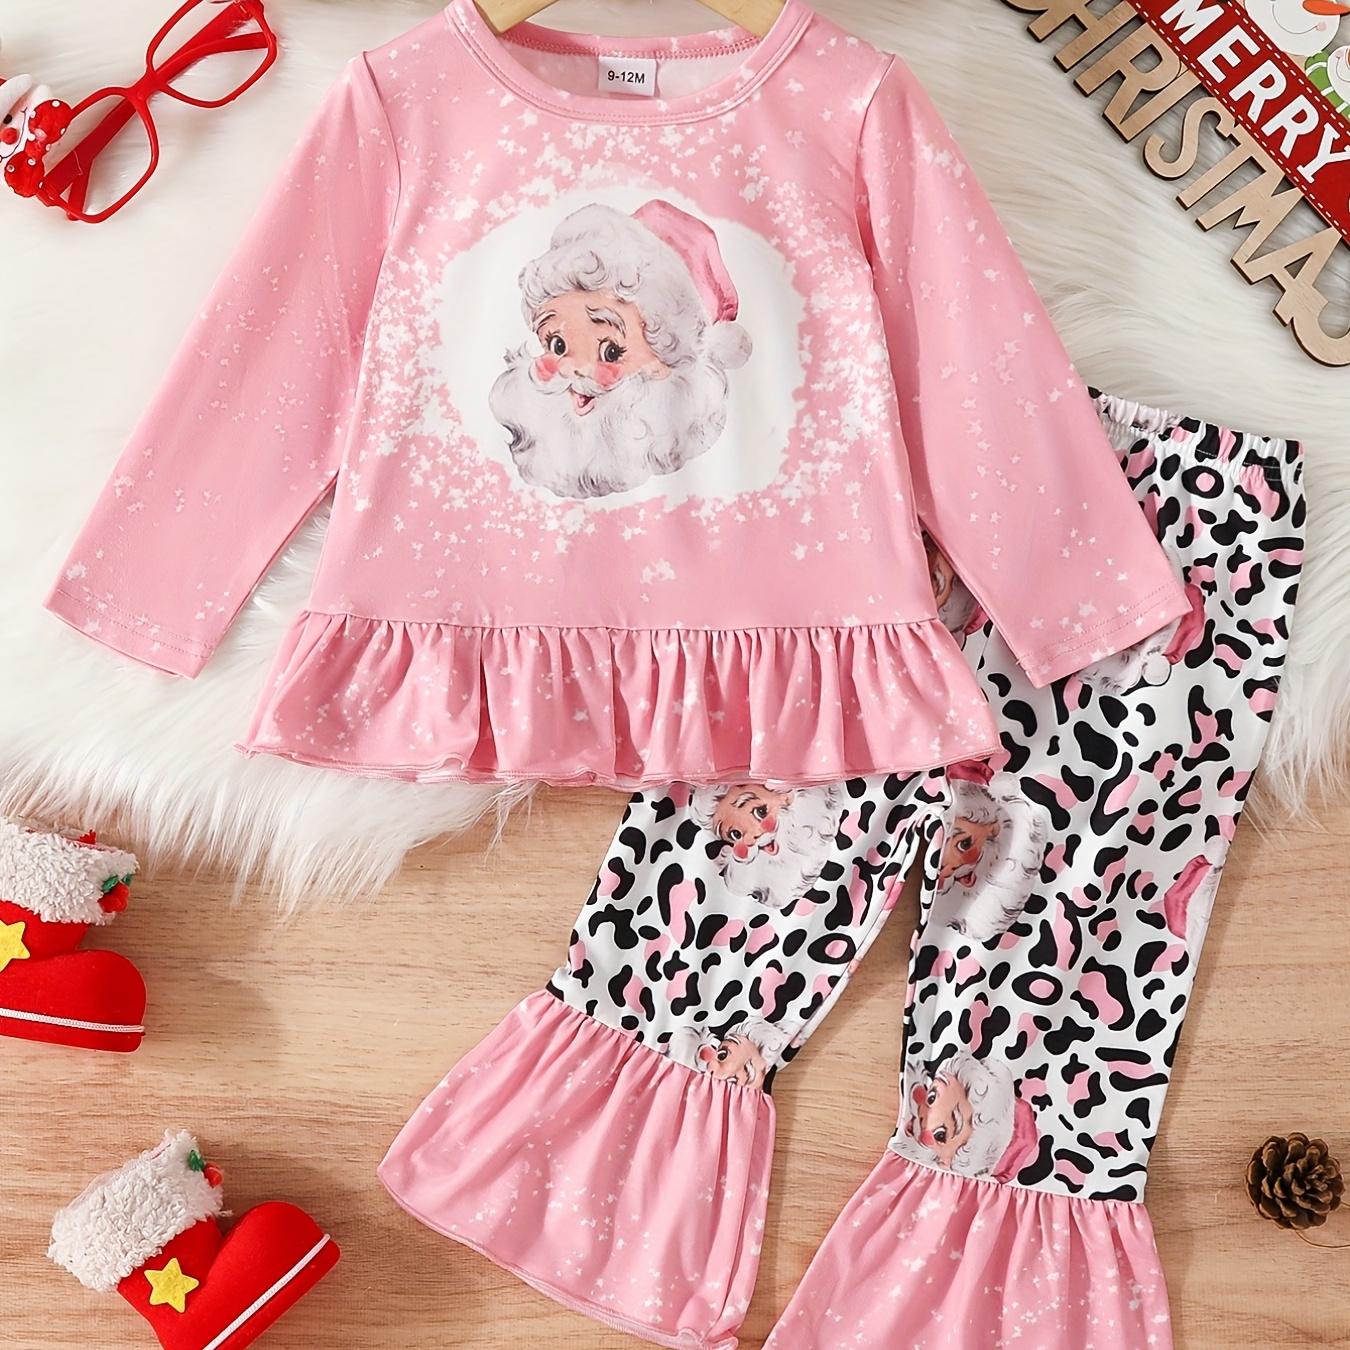 

Toddler Baby Girls Santa Claus Print Cute Outfits - Ruffled Hem Long Sleeve Top Flared Pants Set, Kid's Party Casual Clothes